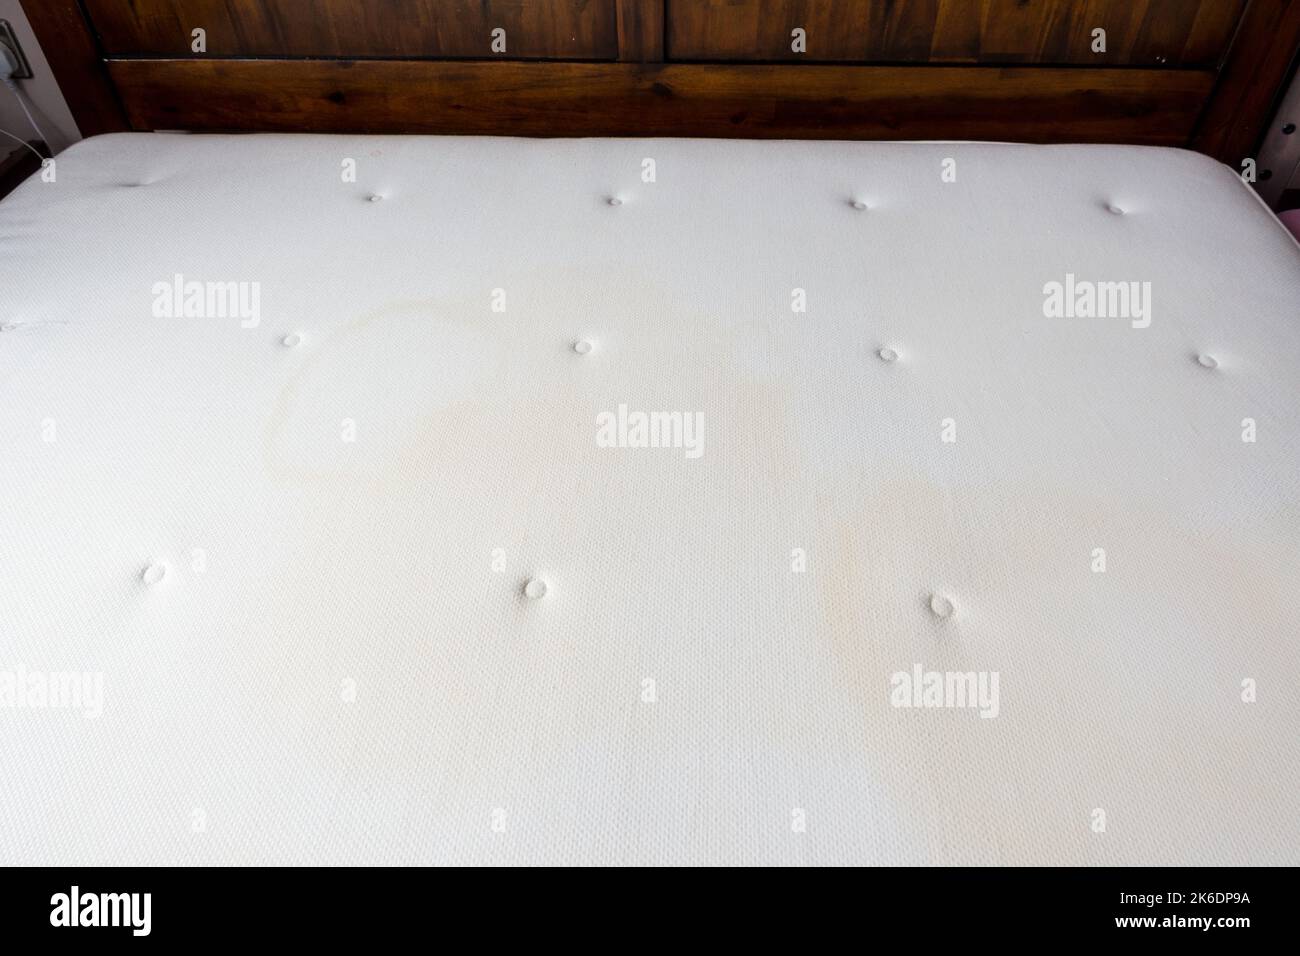 Cleaning a soiled bed mattress Stock Photo